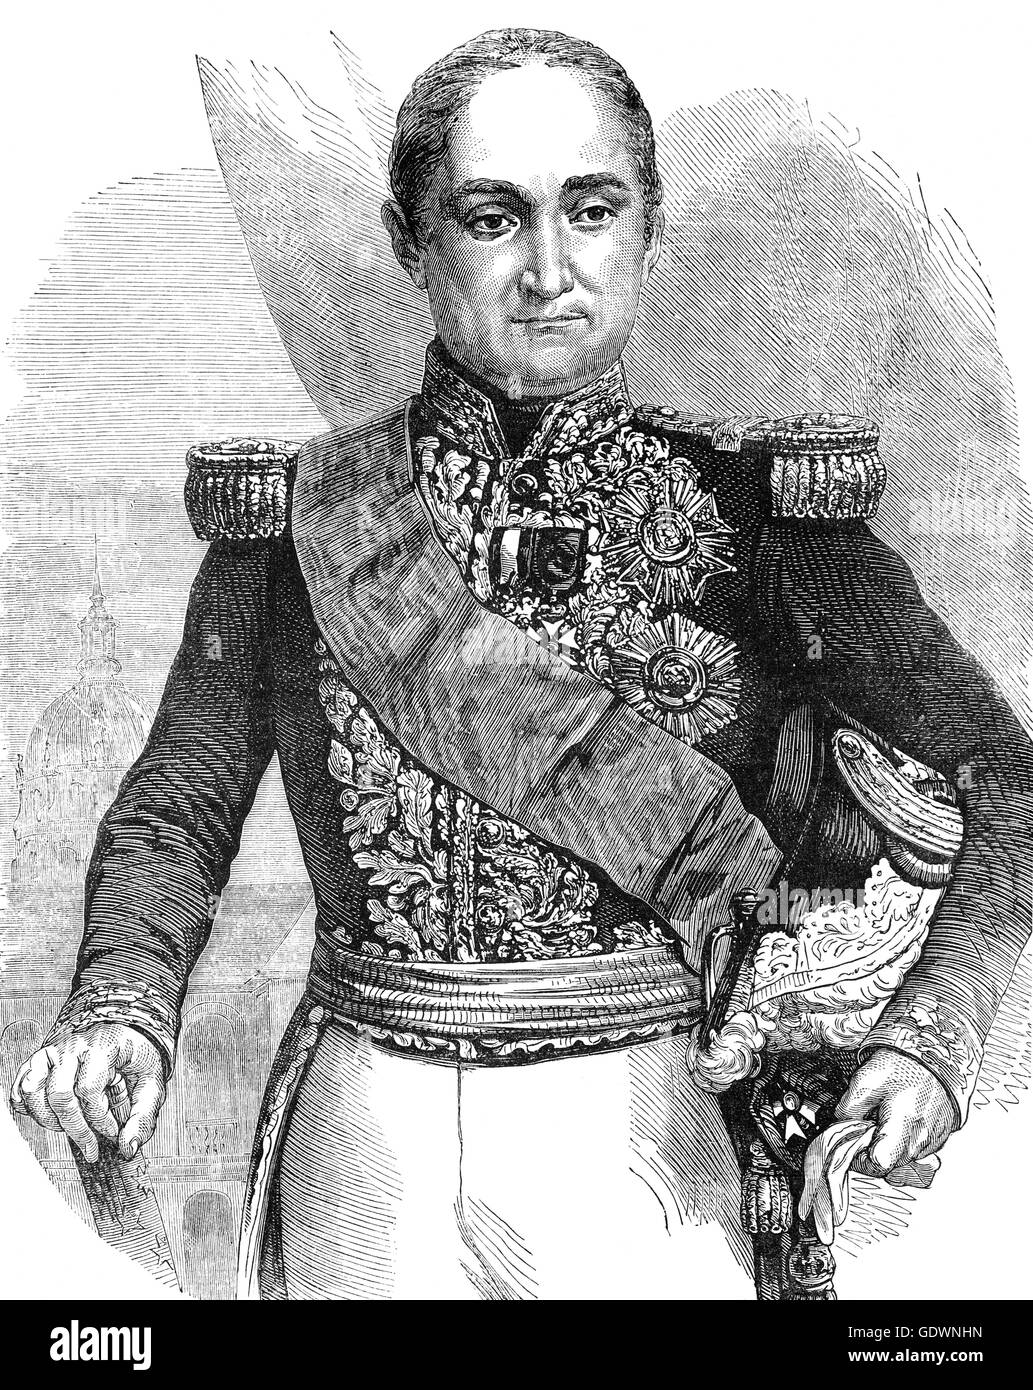 Jérôme-Napoléon Bonaparte (1784 – 1860) was the youngest brother of Napoleon I and reigned as Jerome I, King of Westphalia, between 1807 and 1813. Stock Photo